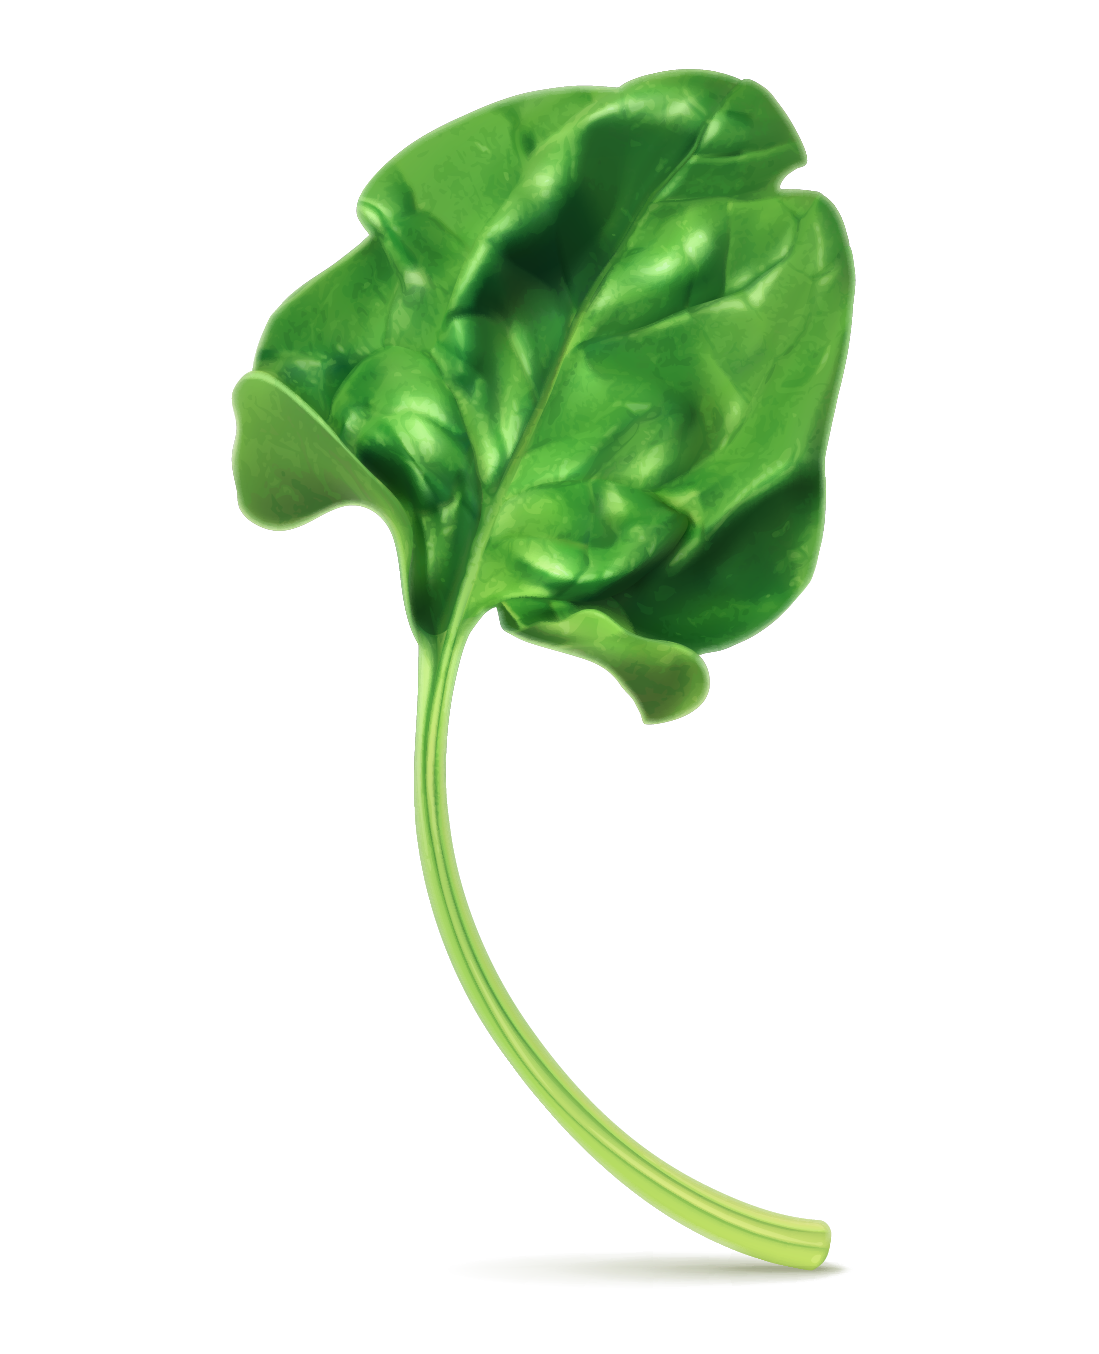 Raw Spinach Transparent Image